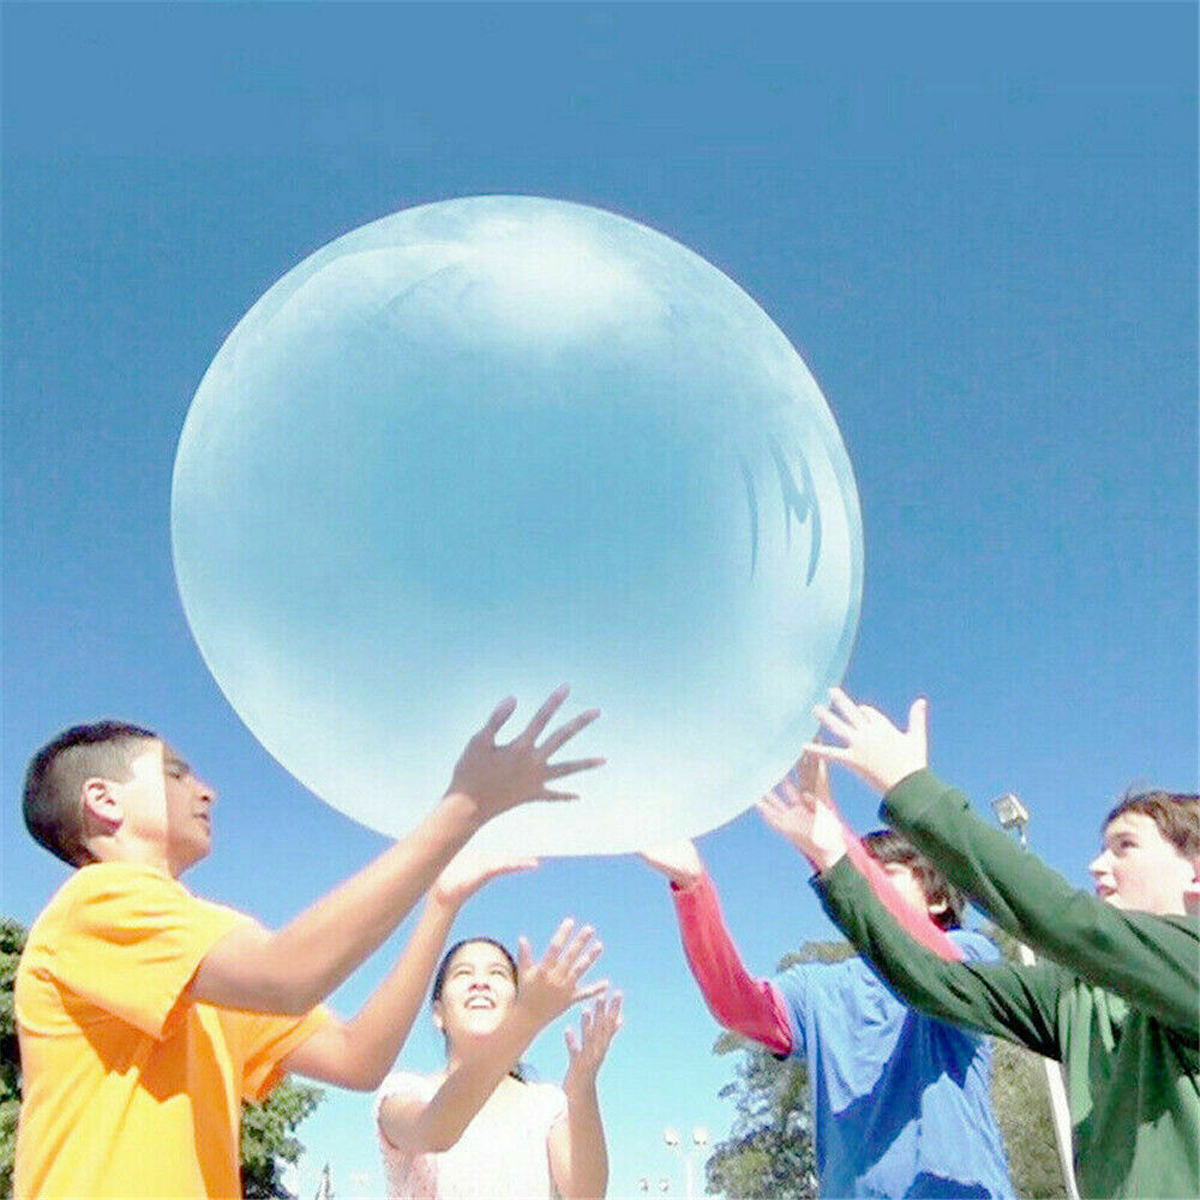 120CM-Multi-color-Bubble-Ball-Inflatable-Filling-Water-Giant-Ball-Toys-for-Kids-Play-Gift-1891654-7